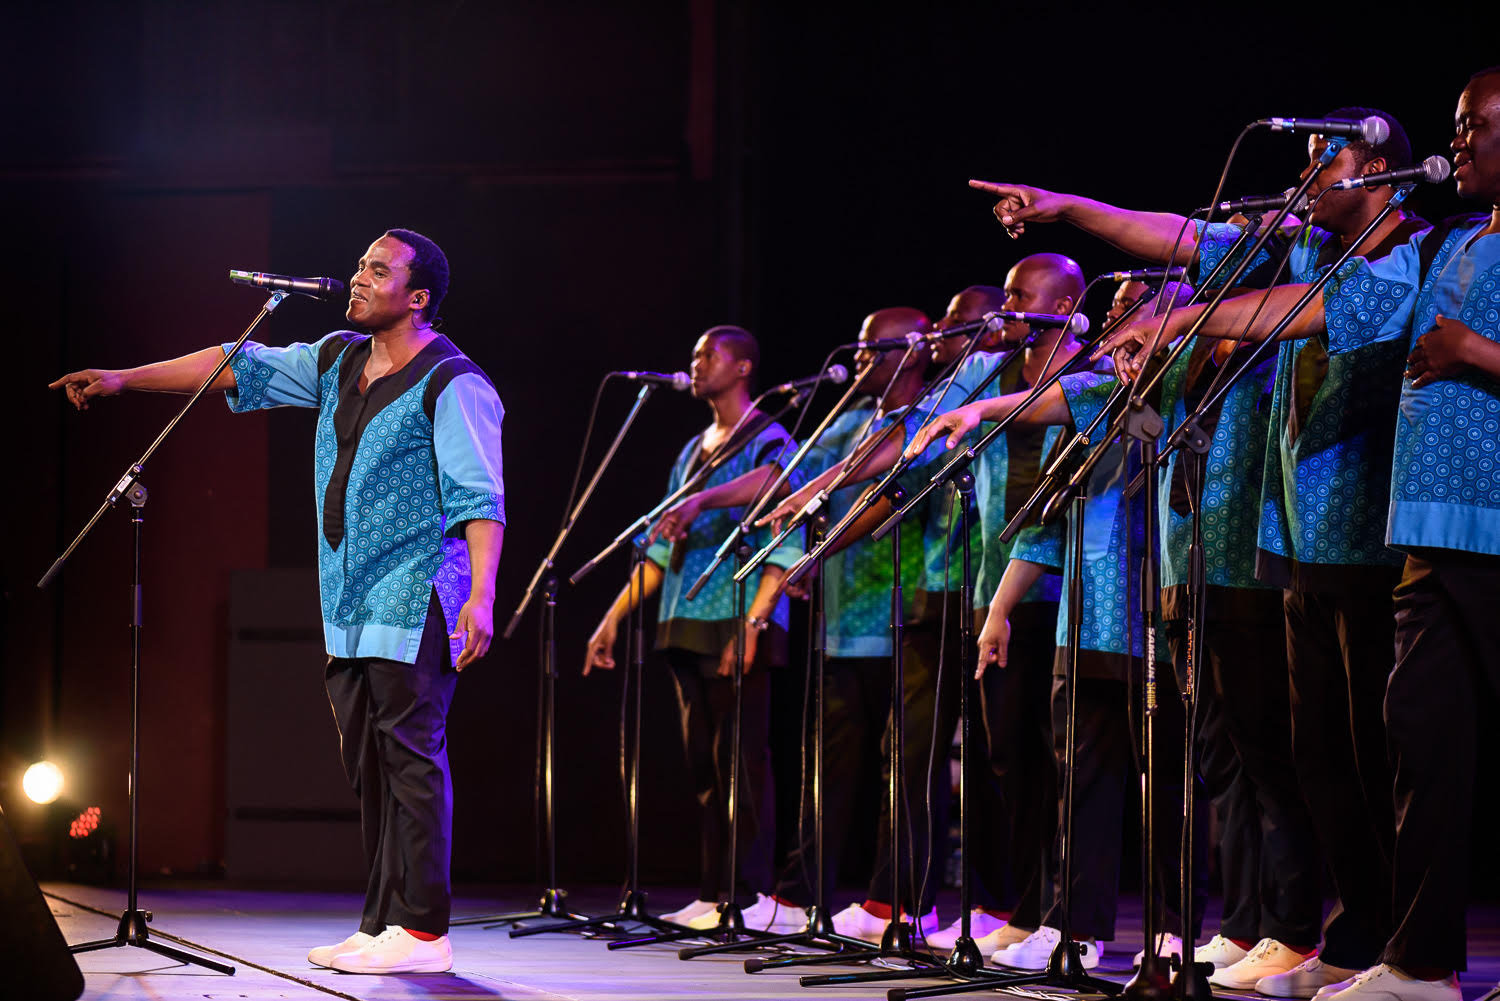 Ladysmith Black Mambazo aims to make the festival an annual staple for music lovers in the country and is a lead up to its 60th anniversary celebrations in the music industry in 2020.